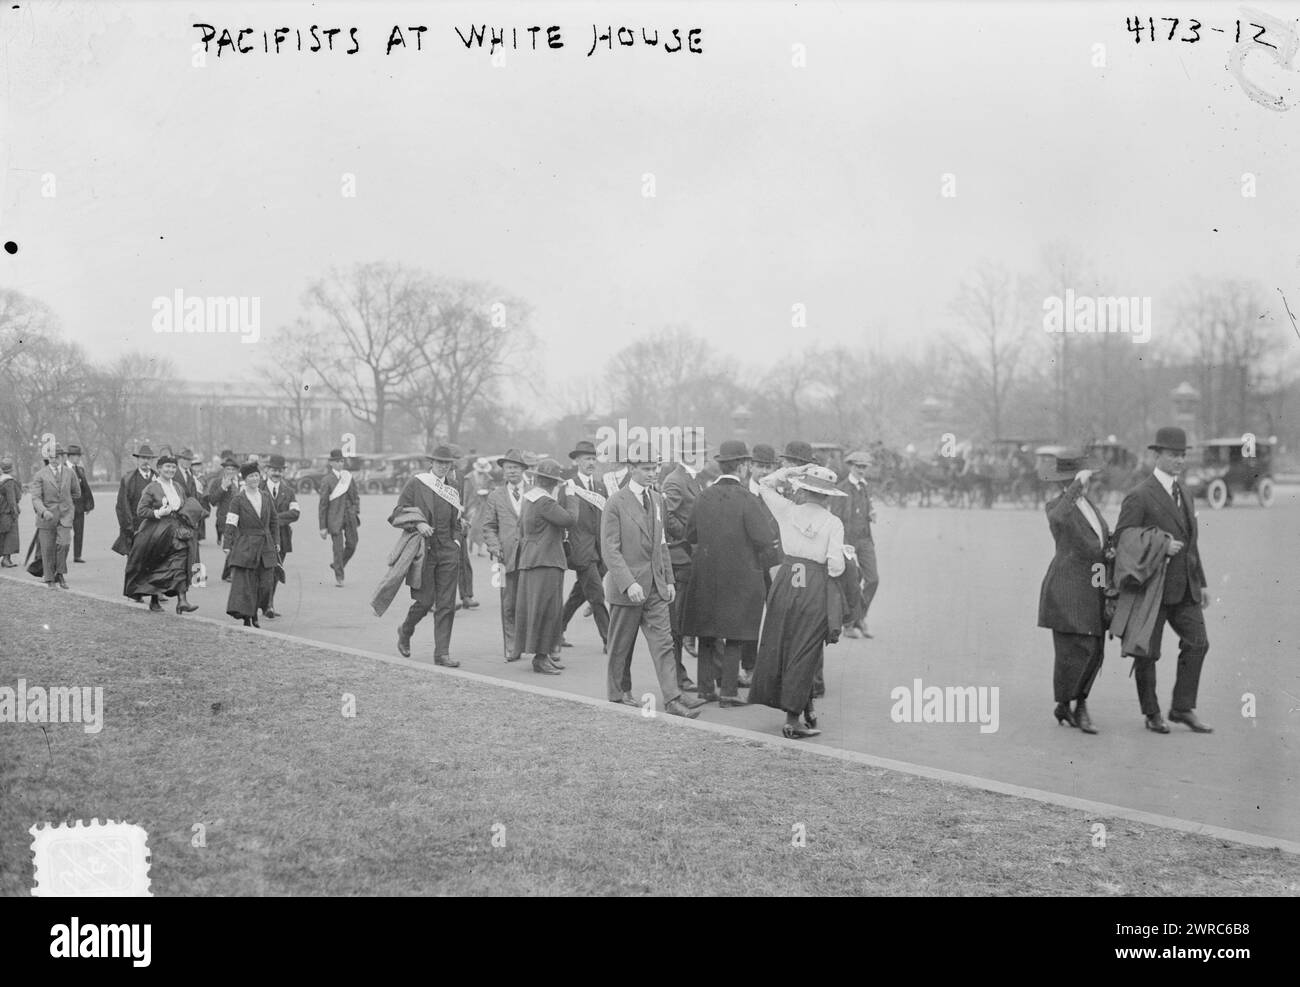 Pacifists at White House i.e. U.S. Capitol, Photograph shows anti-war protesters at the U.S. Capitol rallying against President Wilson's speech to Congress asking for a declaration of war, 1917 April 2, United States, District of Columbia, Washington (D.C.), Glass negatives, 1 negative: glass Stock Photo